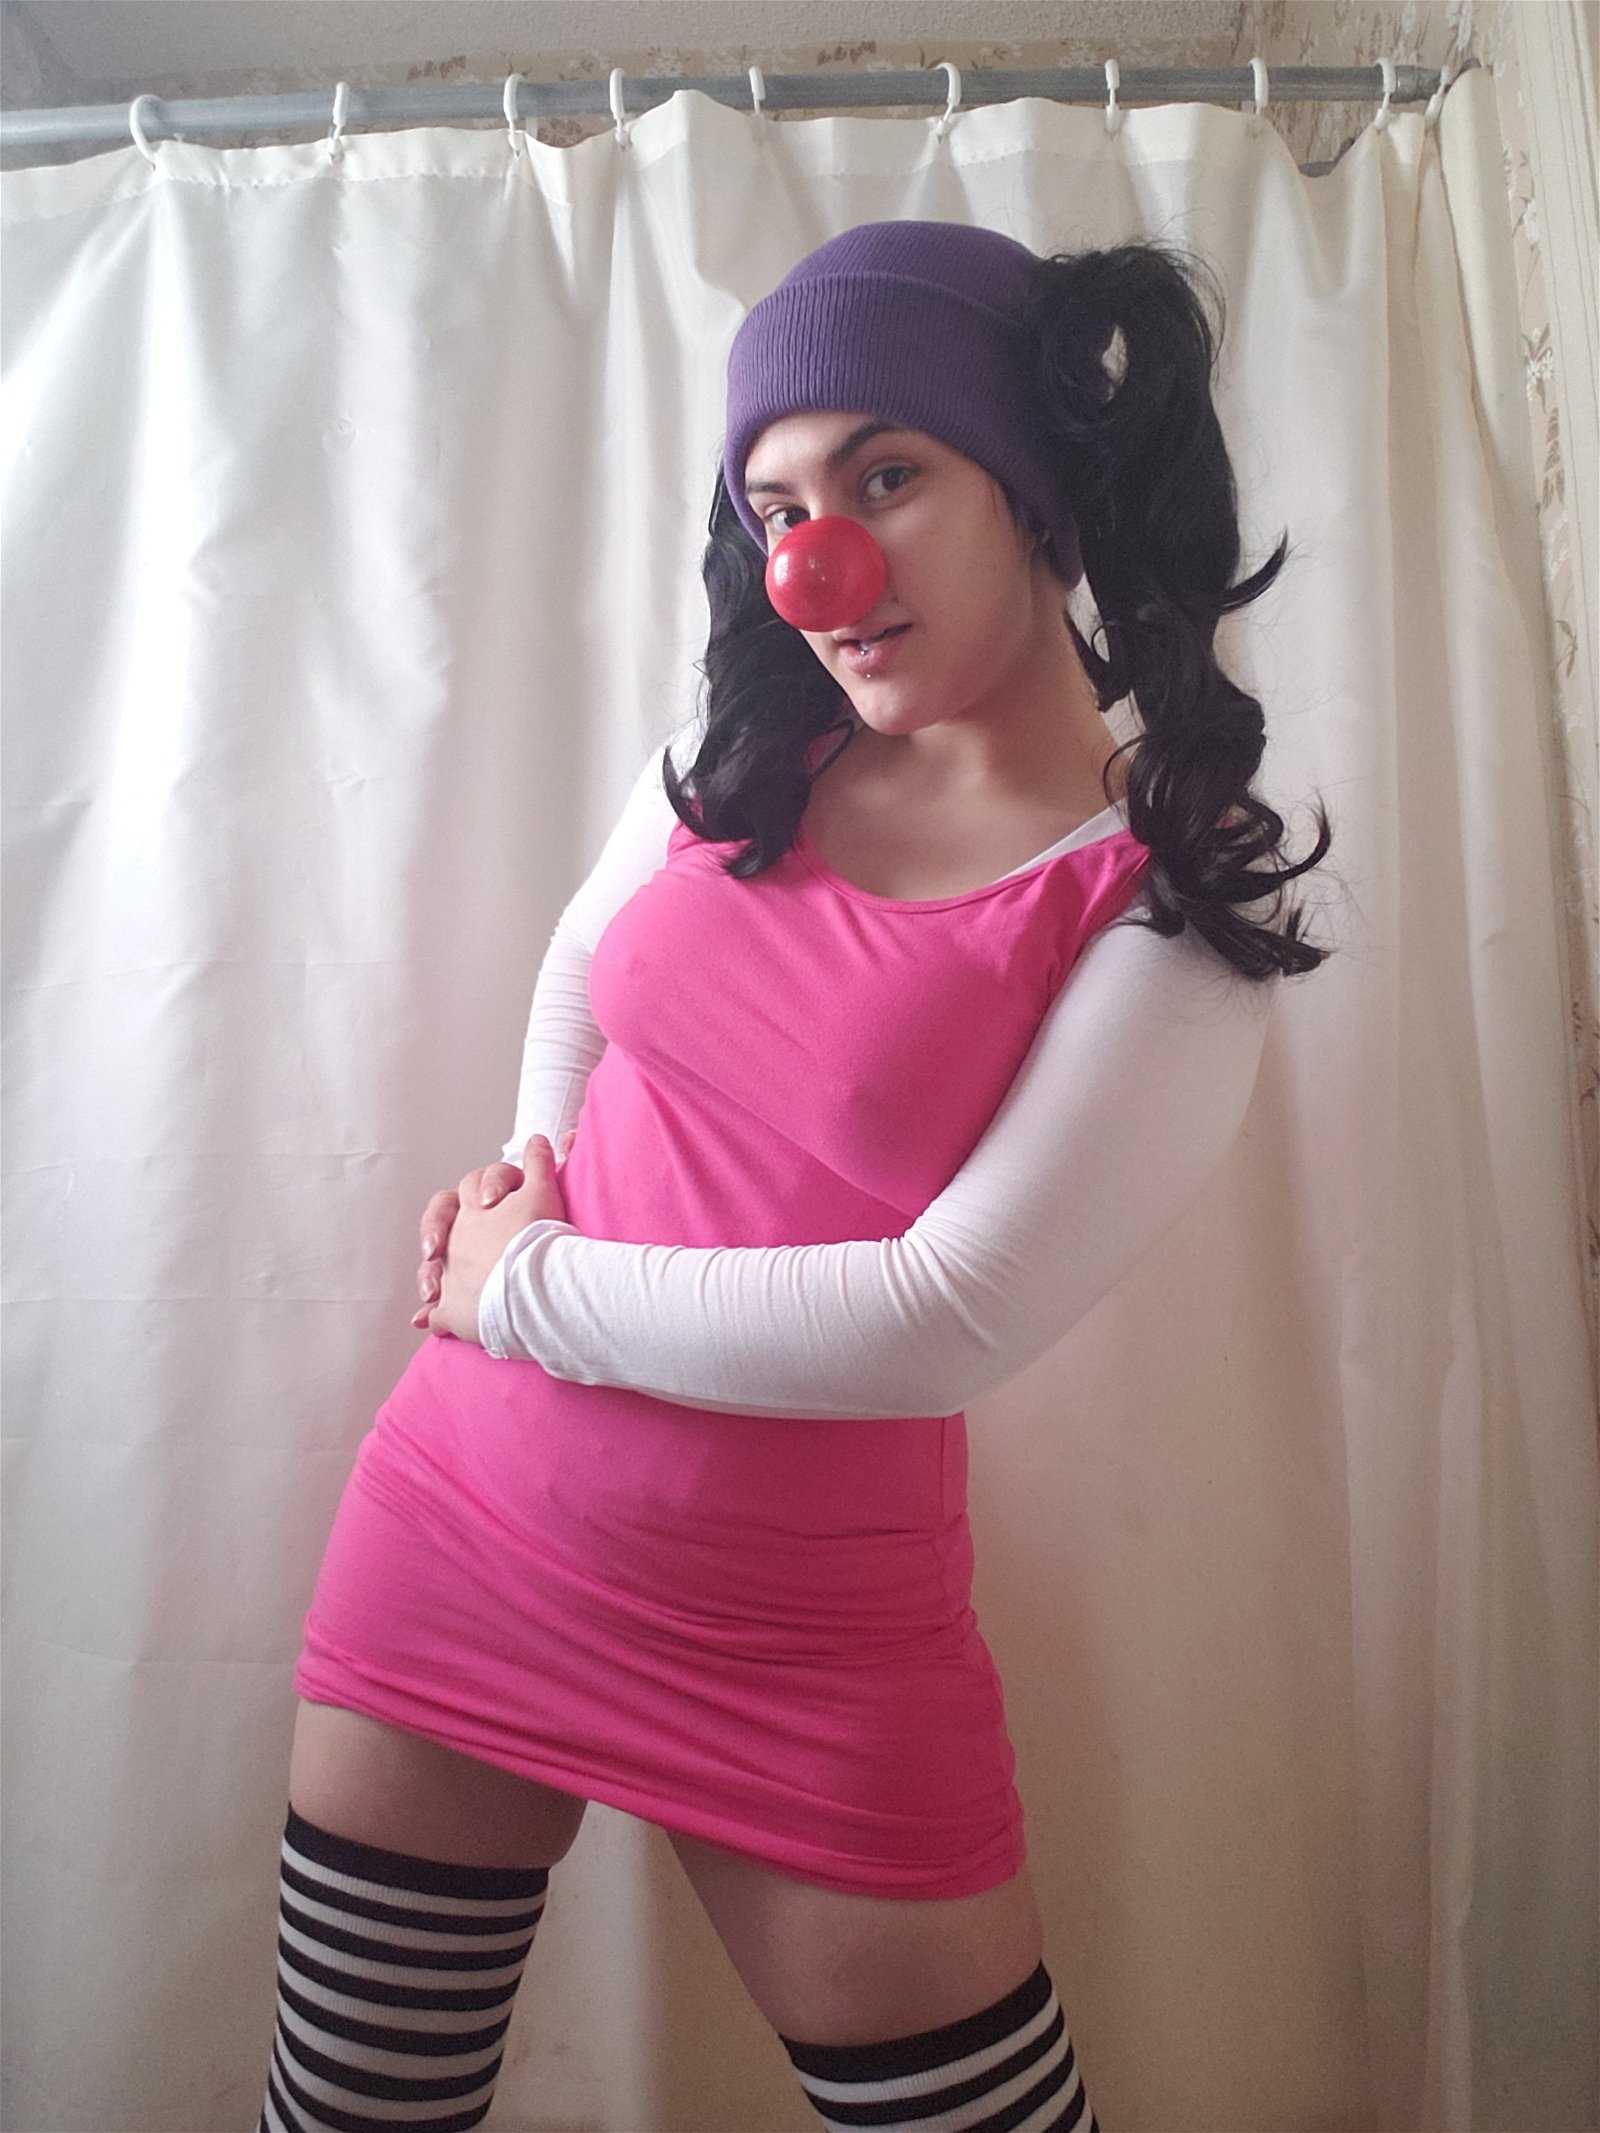 Photo by SynthetikaCosplay with the username @SynthetikaCosplay, who is a star user,  December 10, 2018 at 12:24 AM. The post is about the topic Cosplay and the text says 'Childhood enhanced 😉
Character: Loonette the Clown 
Show: Big Comfy Couch'